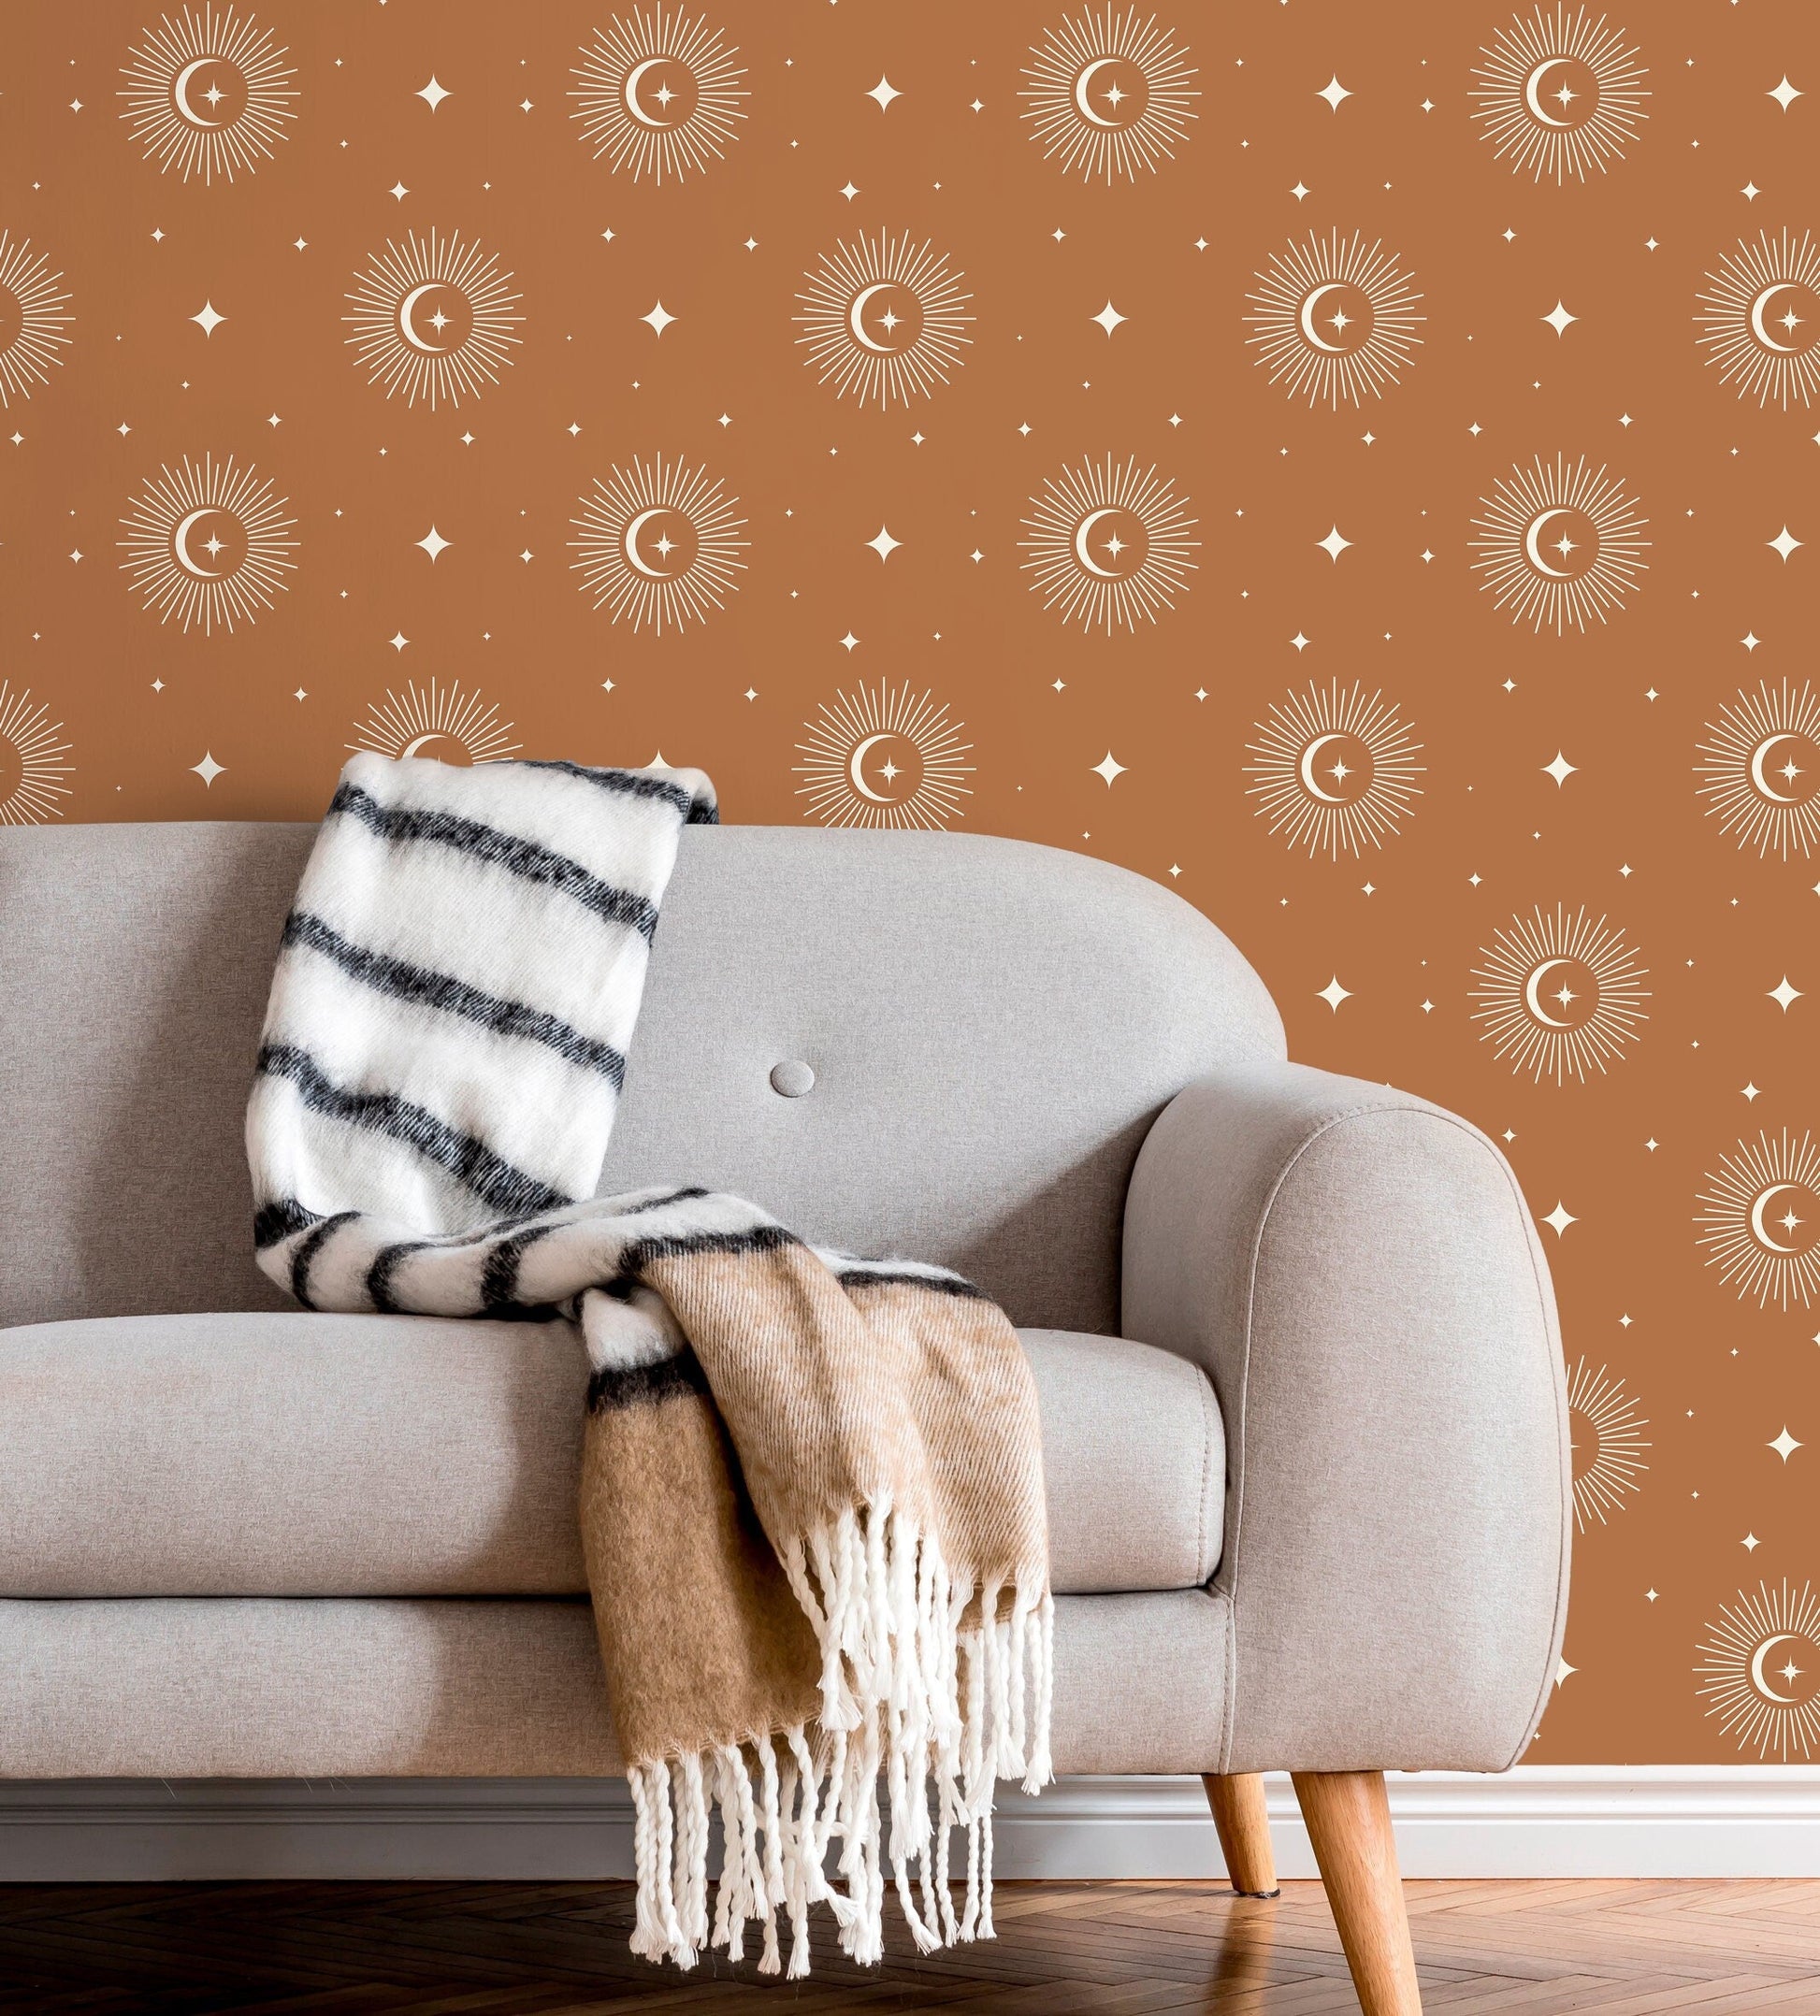 Mystique and Celestial Wallpaper Removable Peel and Stick Wallpaper Peel and Stick Wallpaper Moon and Magic - ZAAR